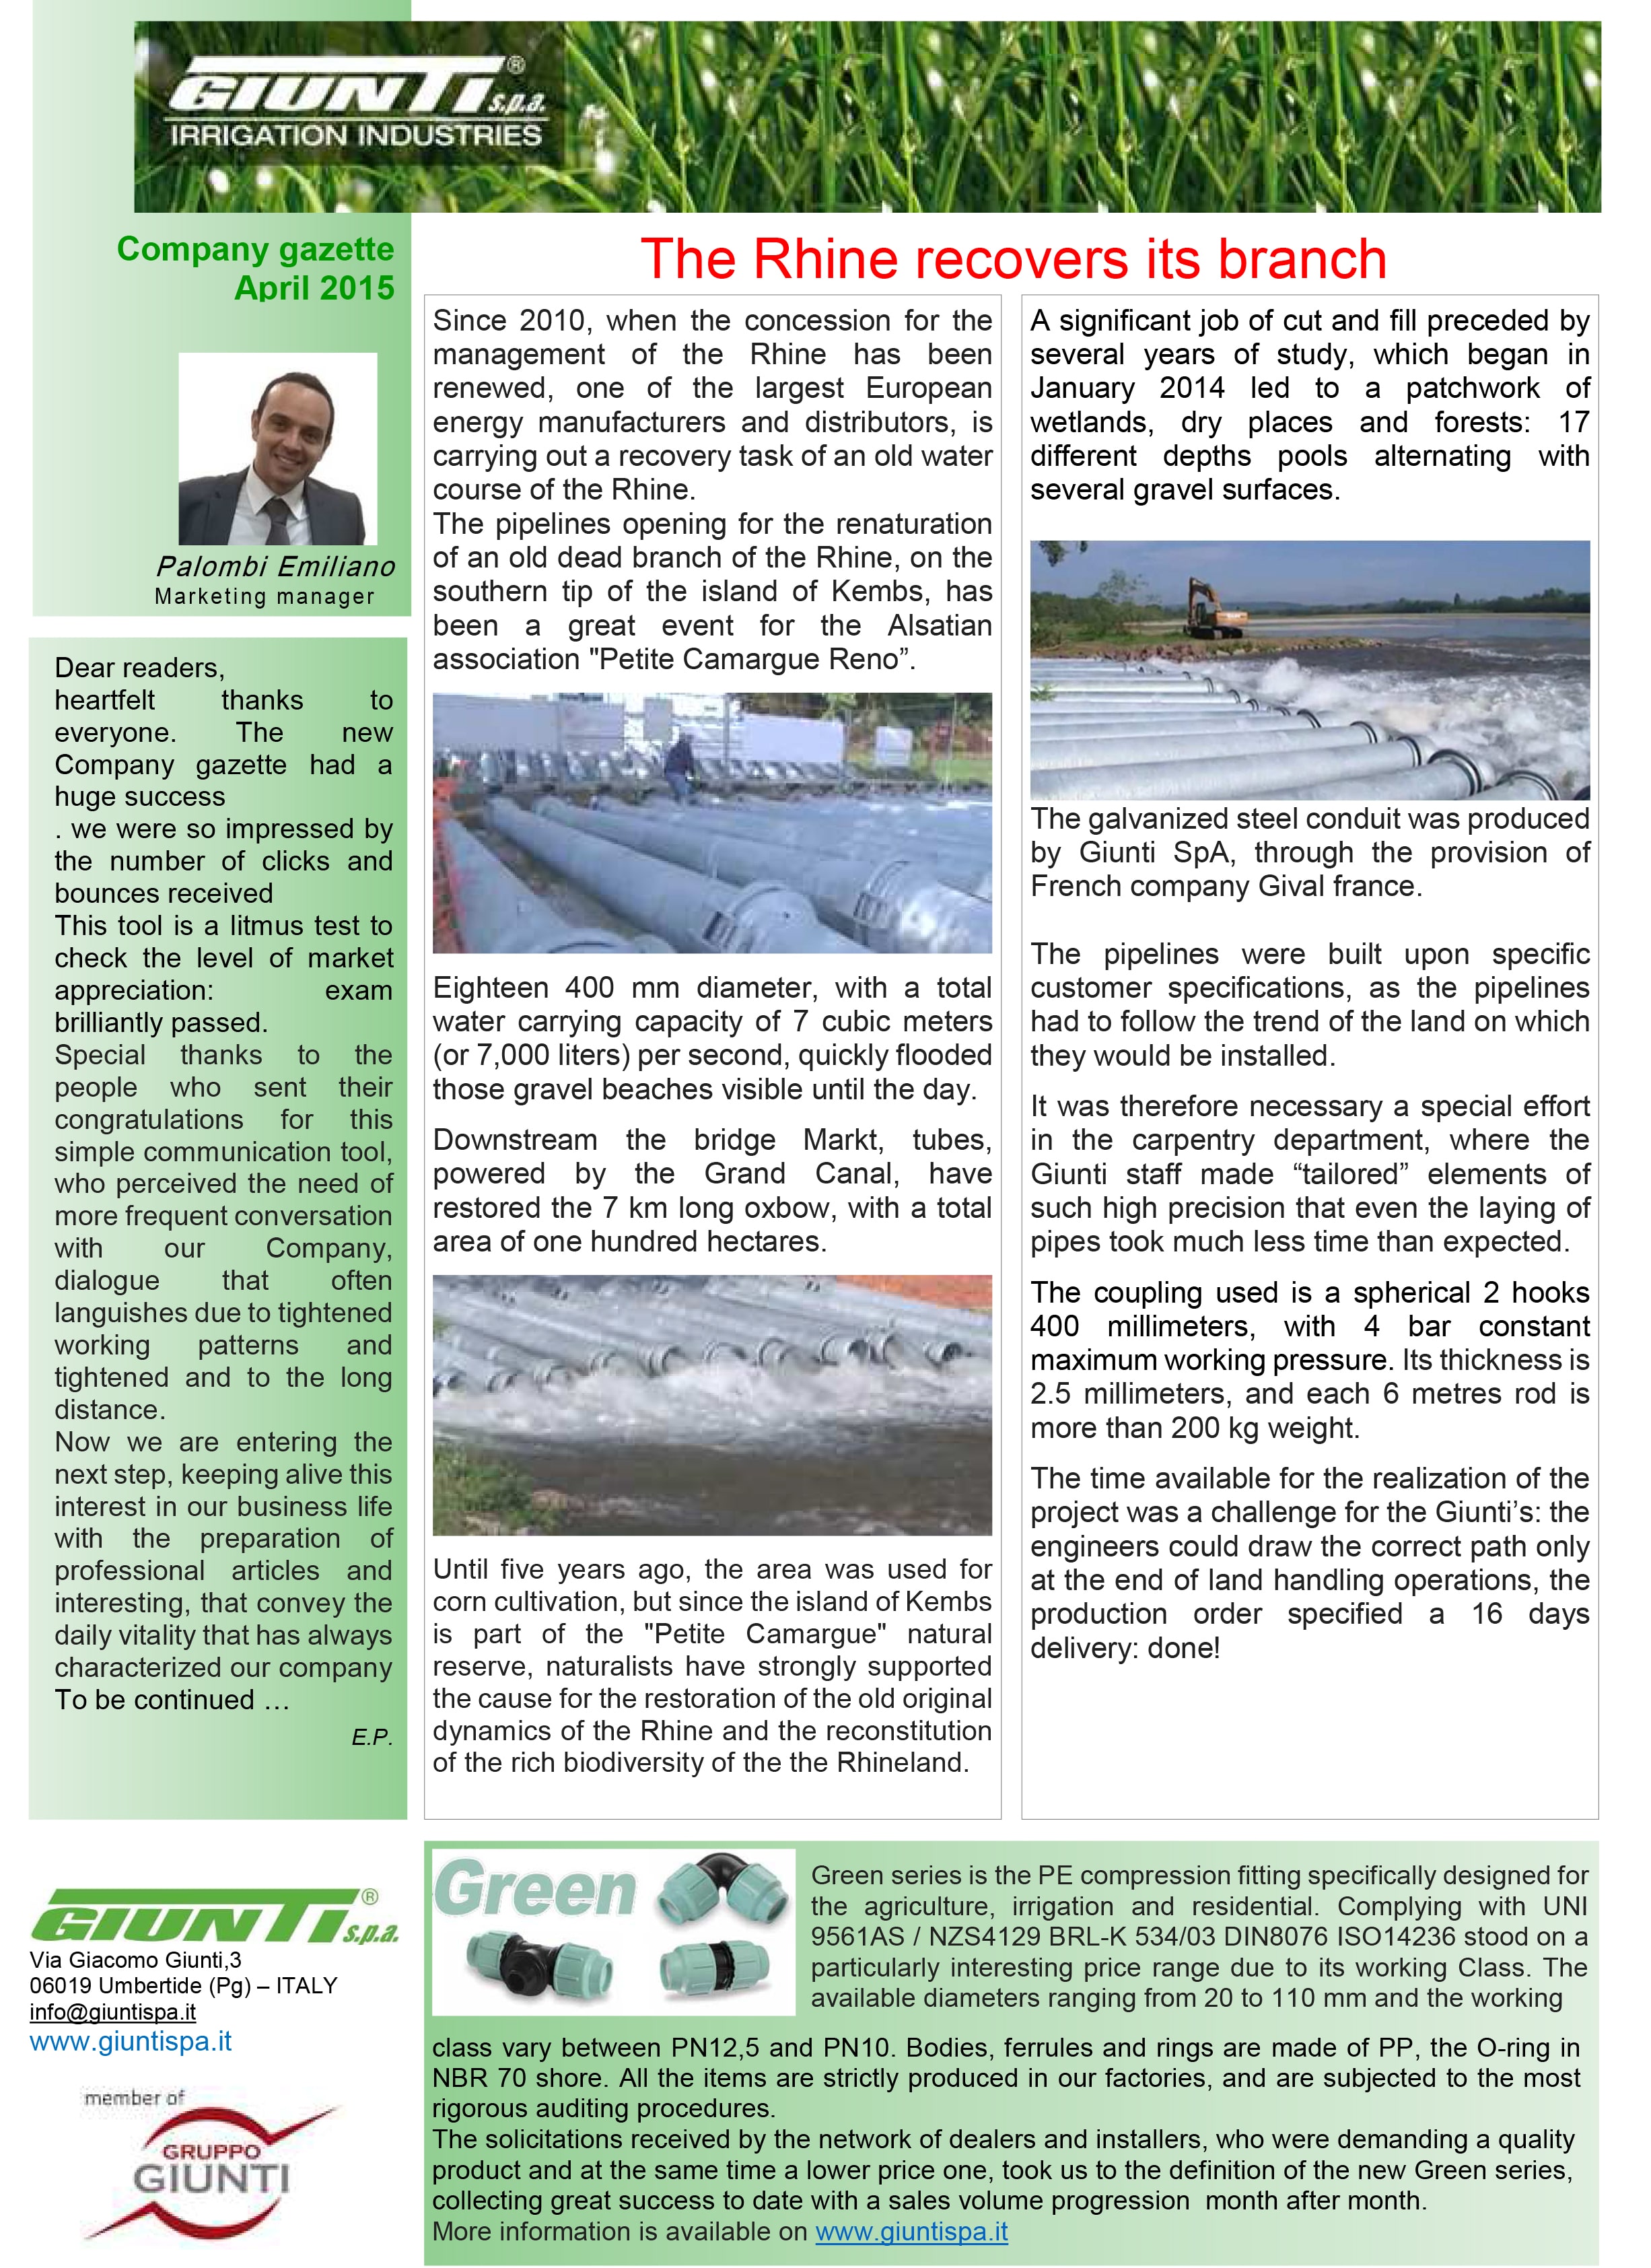 GIUNTI S.p.A. - Newsletter Aprile 2015 - The Rhine recovers its